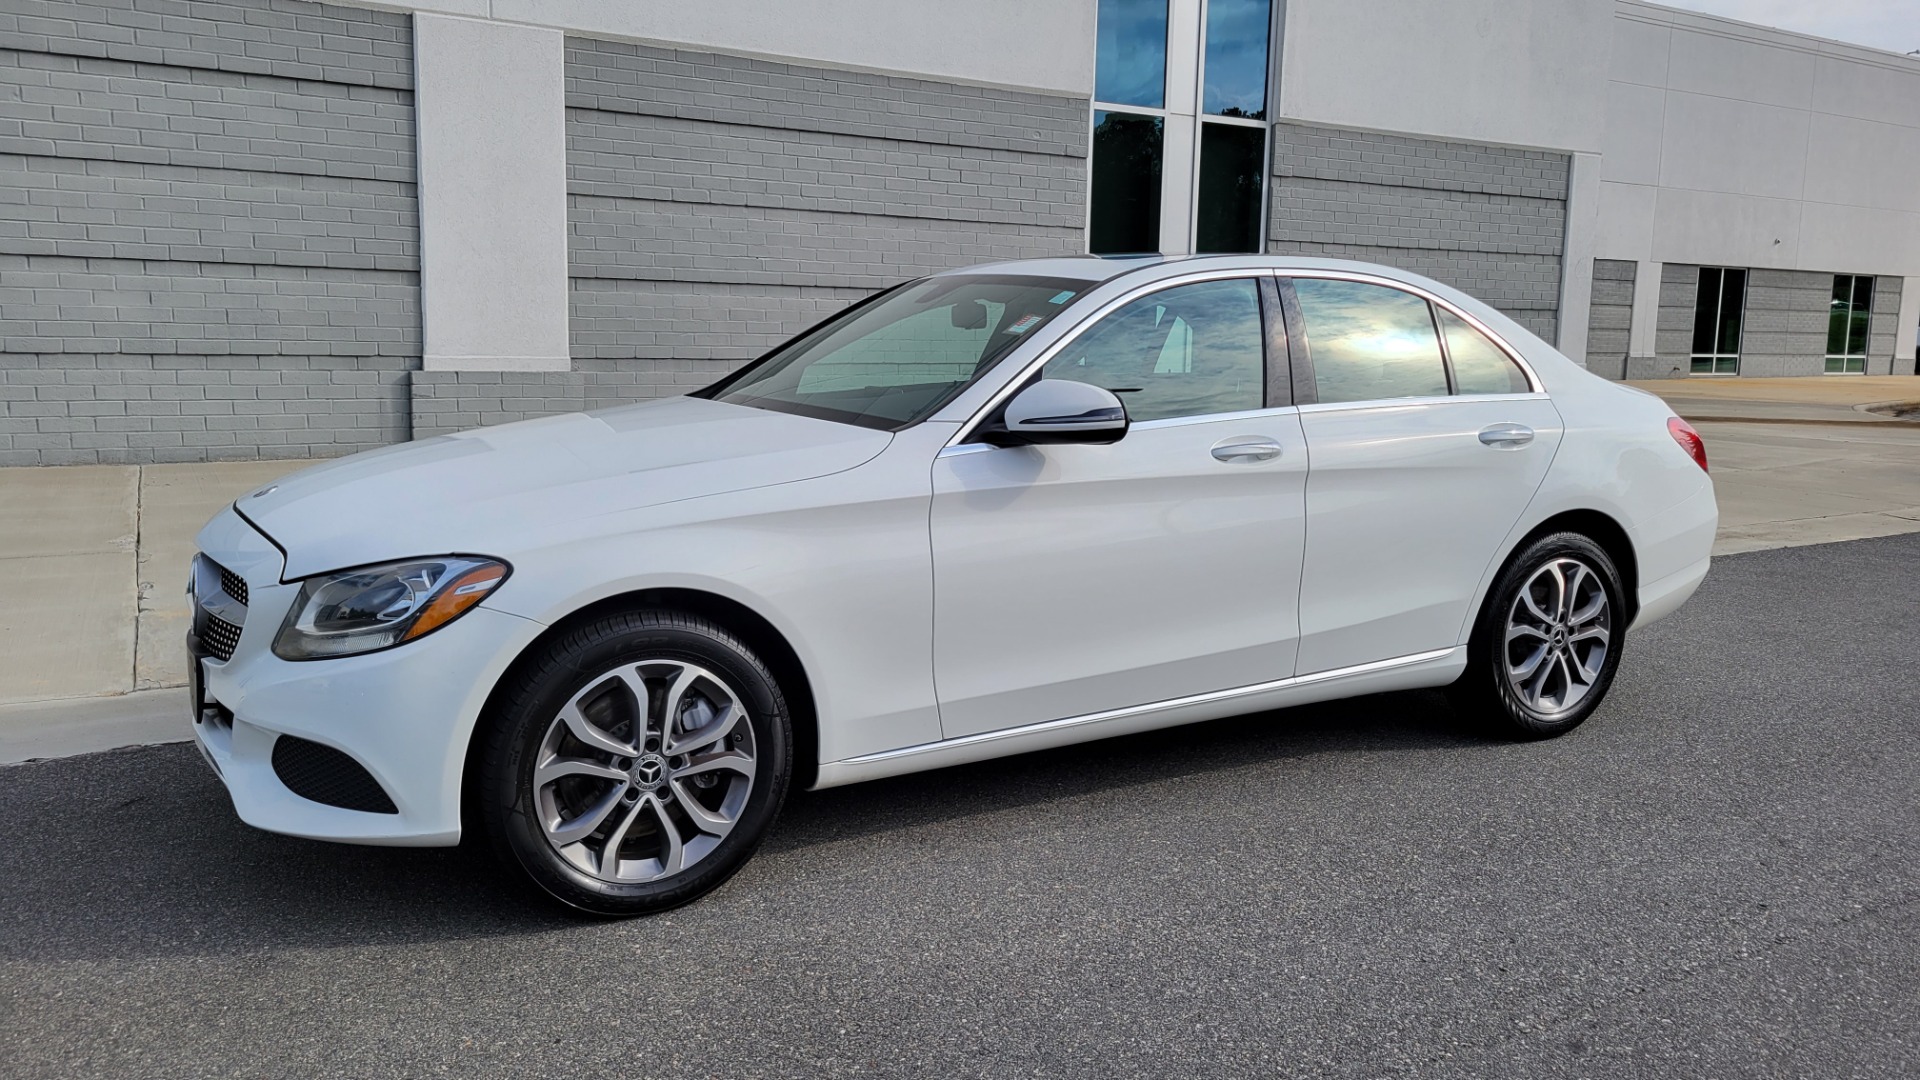 Used 2018 Mercedes-Benz C-CLASS C 300 PREMIUM / SUNROOF / SMARTPHONE / COMFORT SUSP / CAMERA for sale $31,395 at Formula Imports in Charlotte NC 28227 3